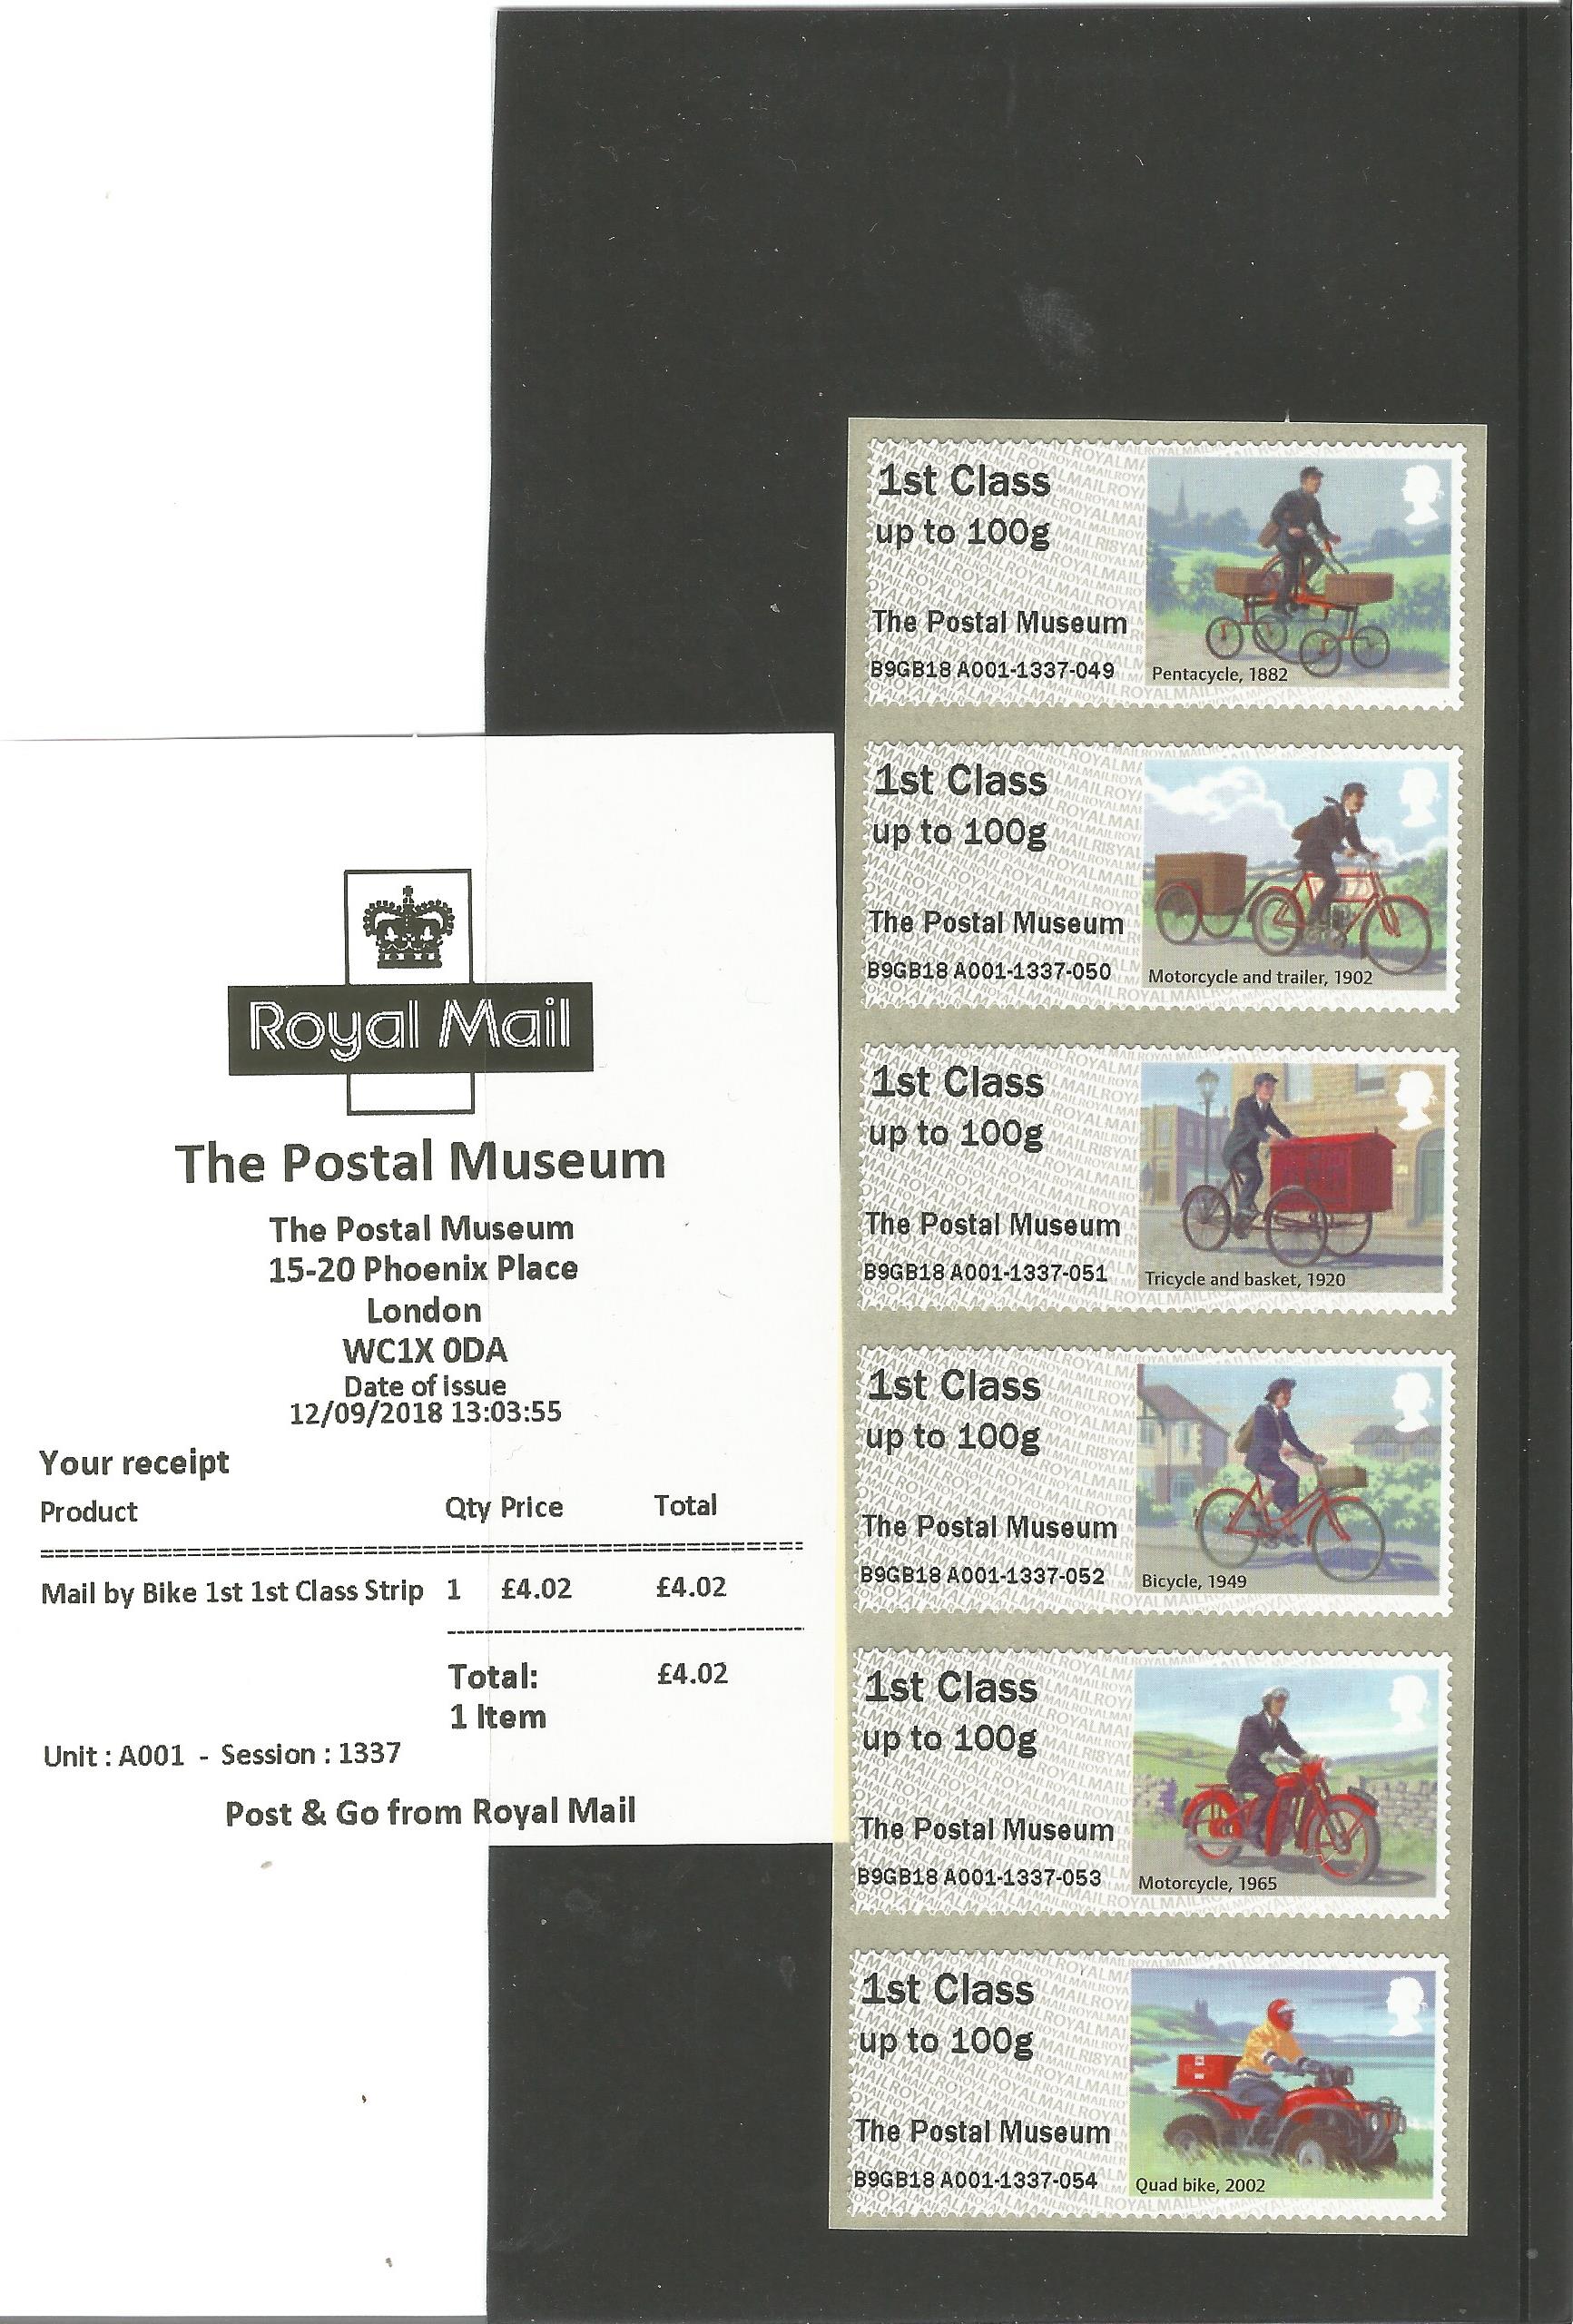 GB mint stamps Mail by Bike 1st Class Strip £4+ face value set in a Hagner Strip, ready to use. Good